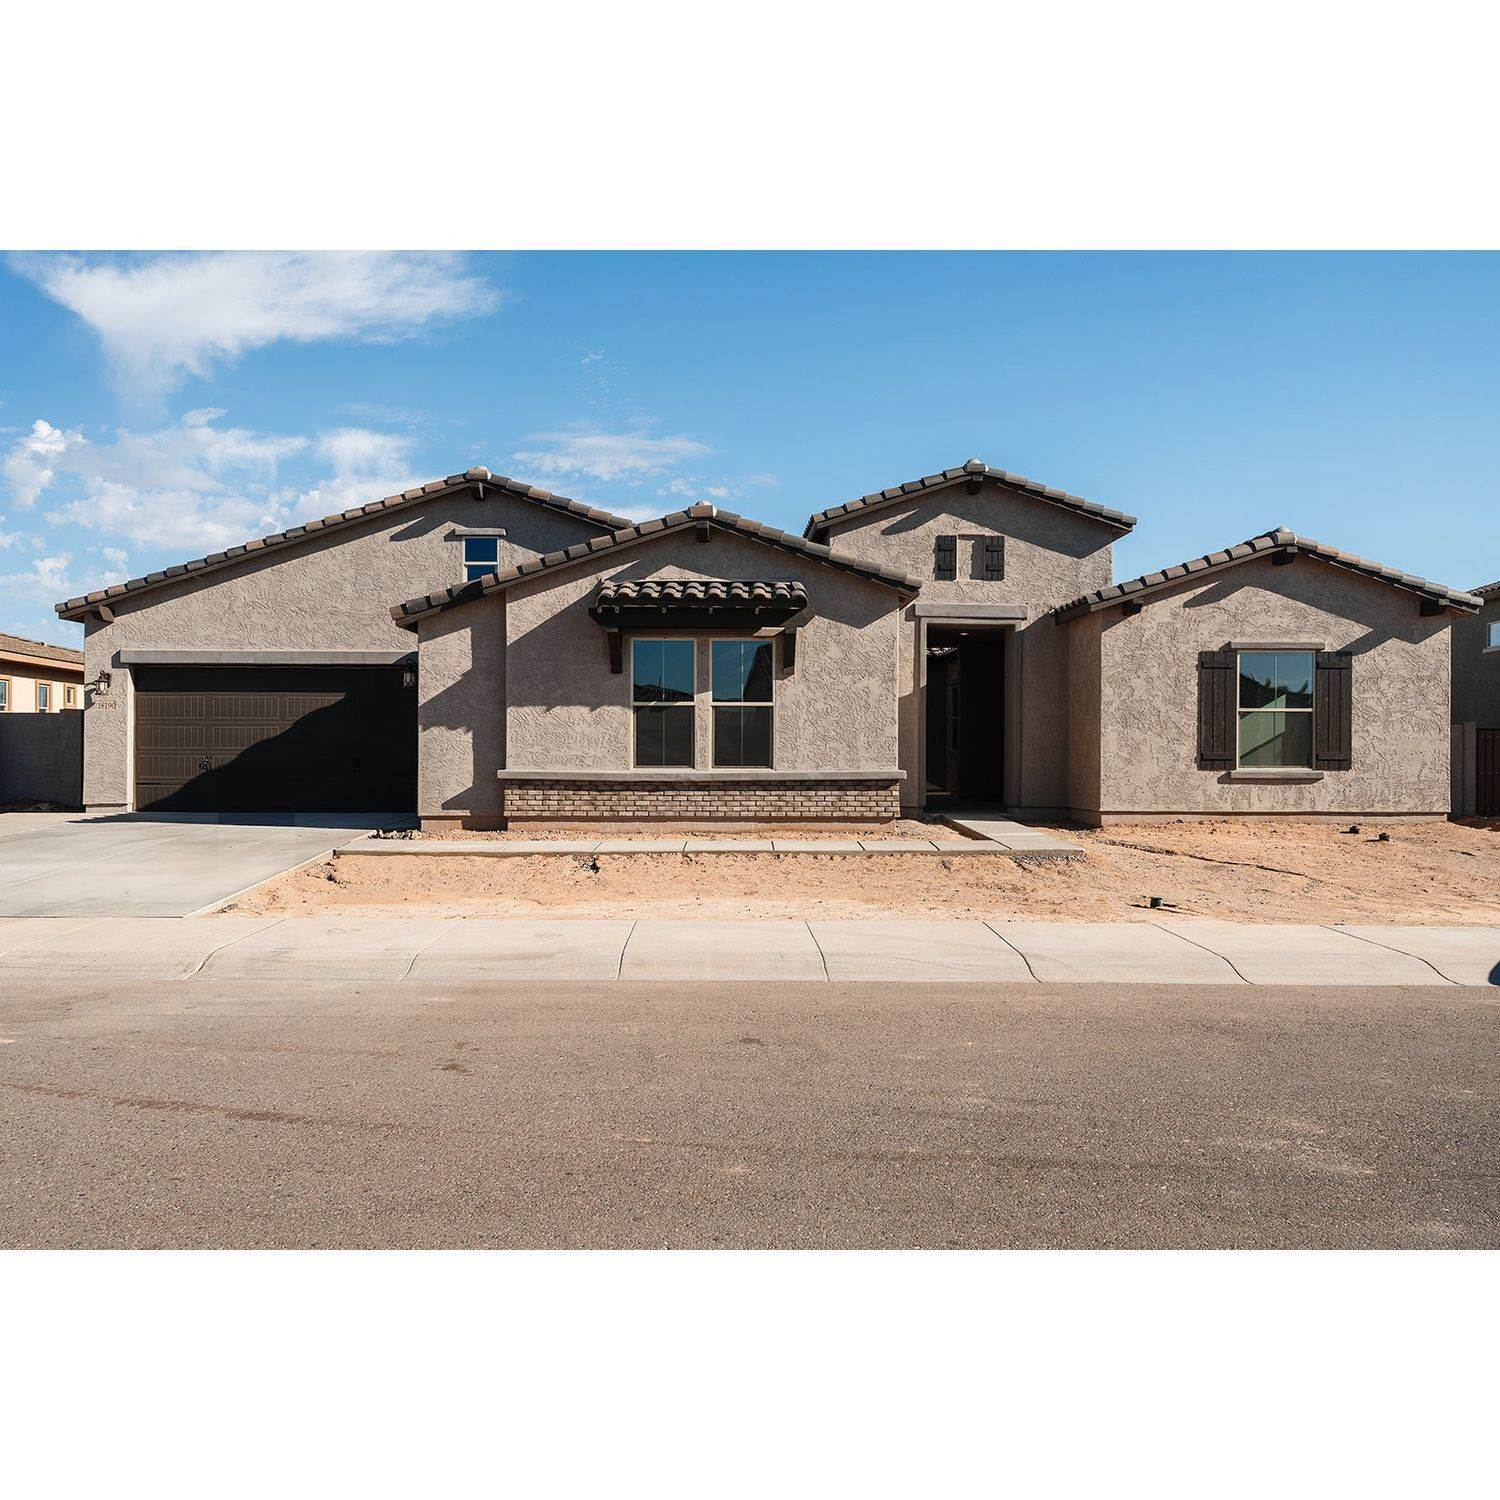 Single Family for Sale at Goodyear, AZ 85395